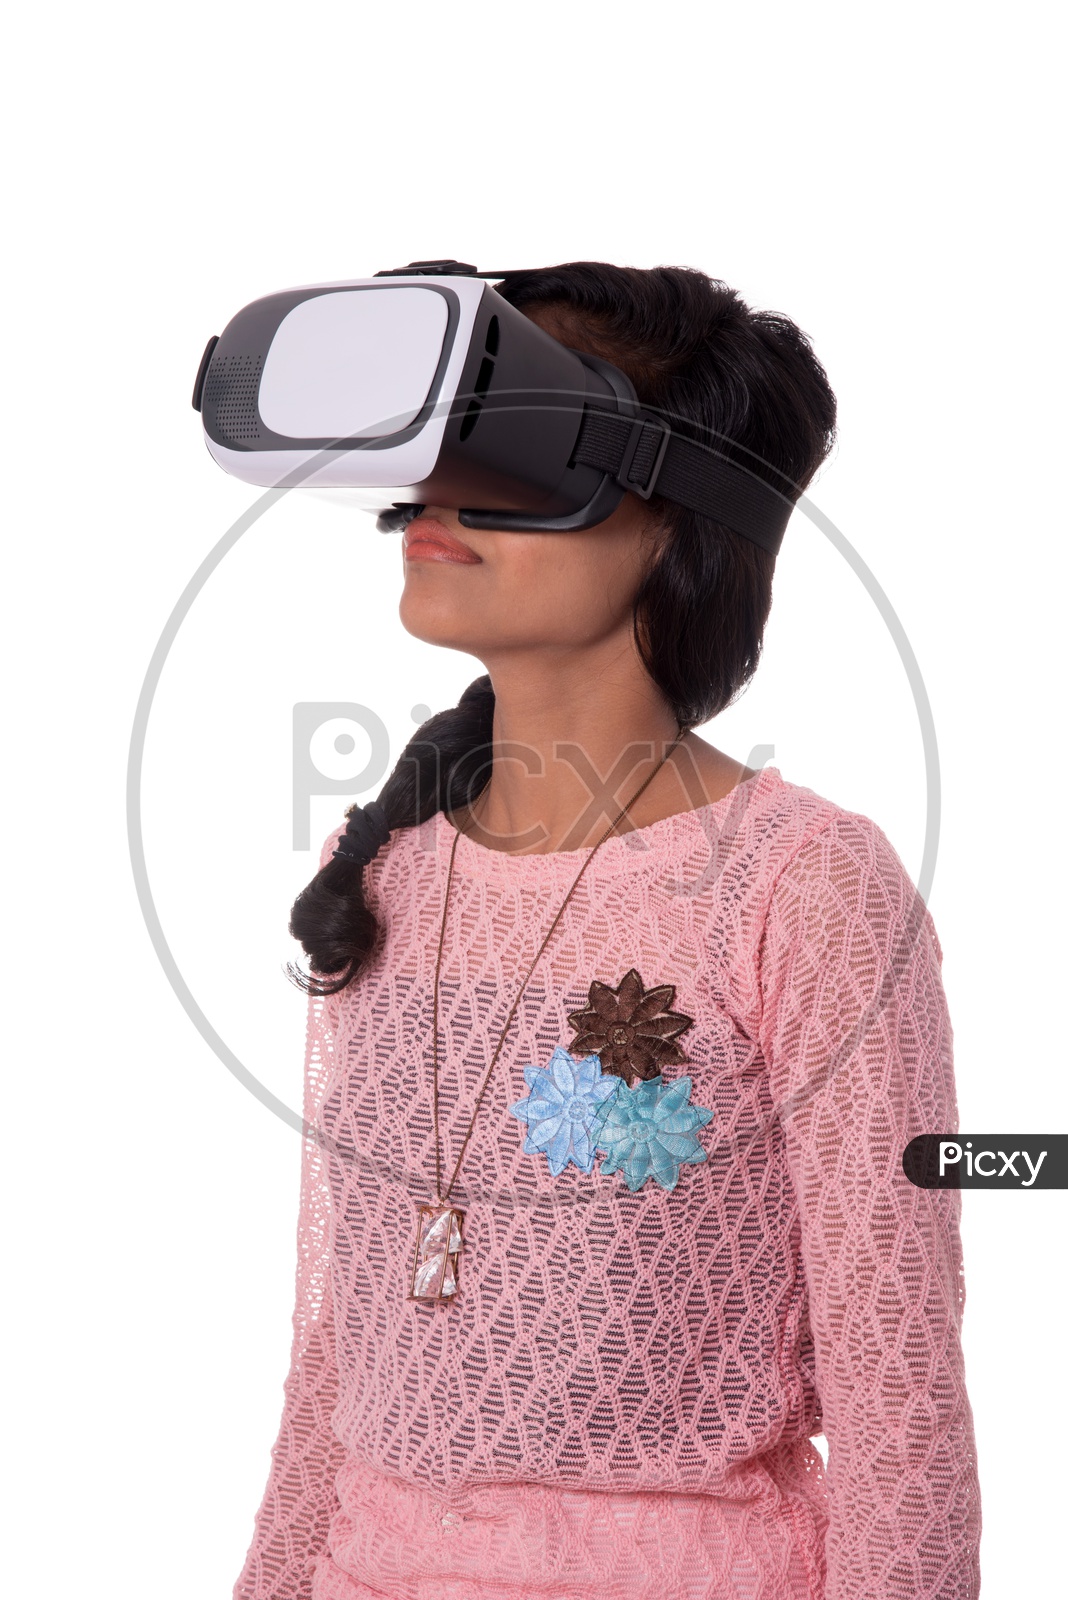 Young Indian Girl Looking  Through VR Device , Indian Girl Experiencing The Virtual Reality  Headset